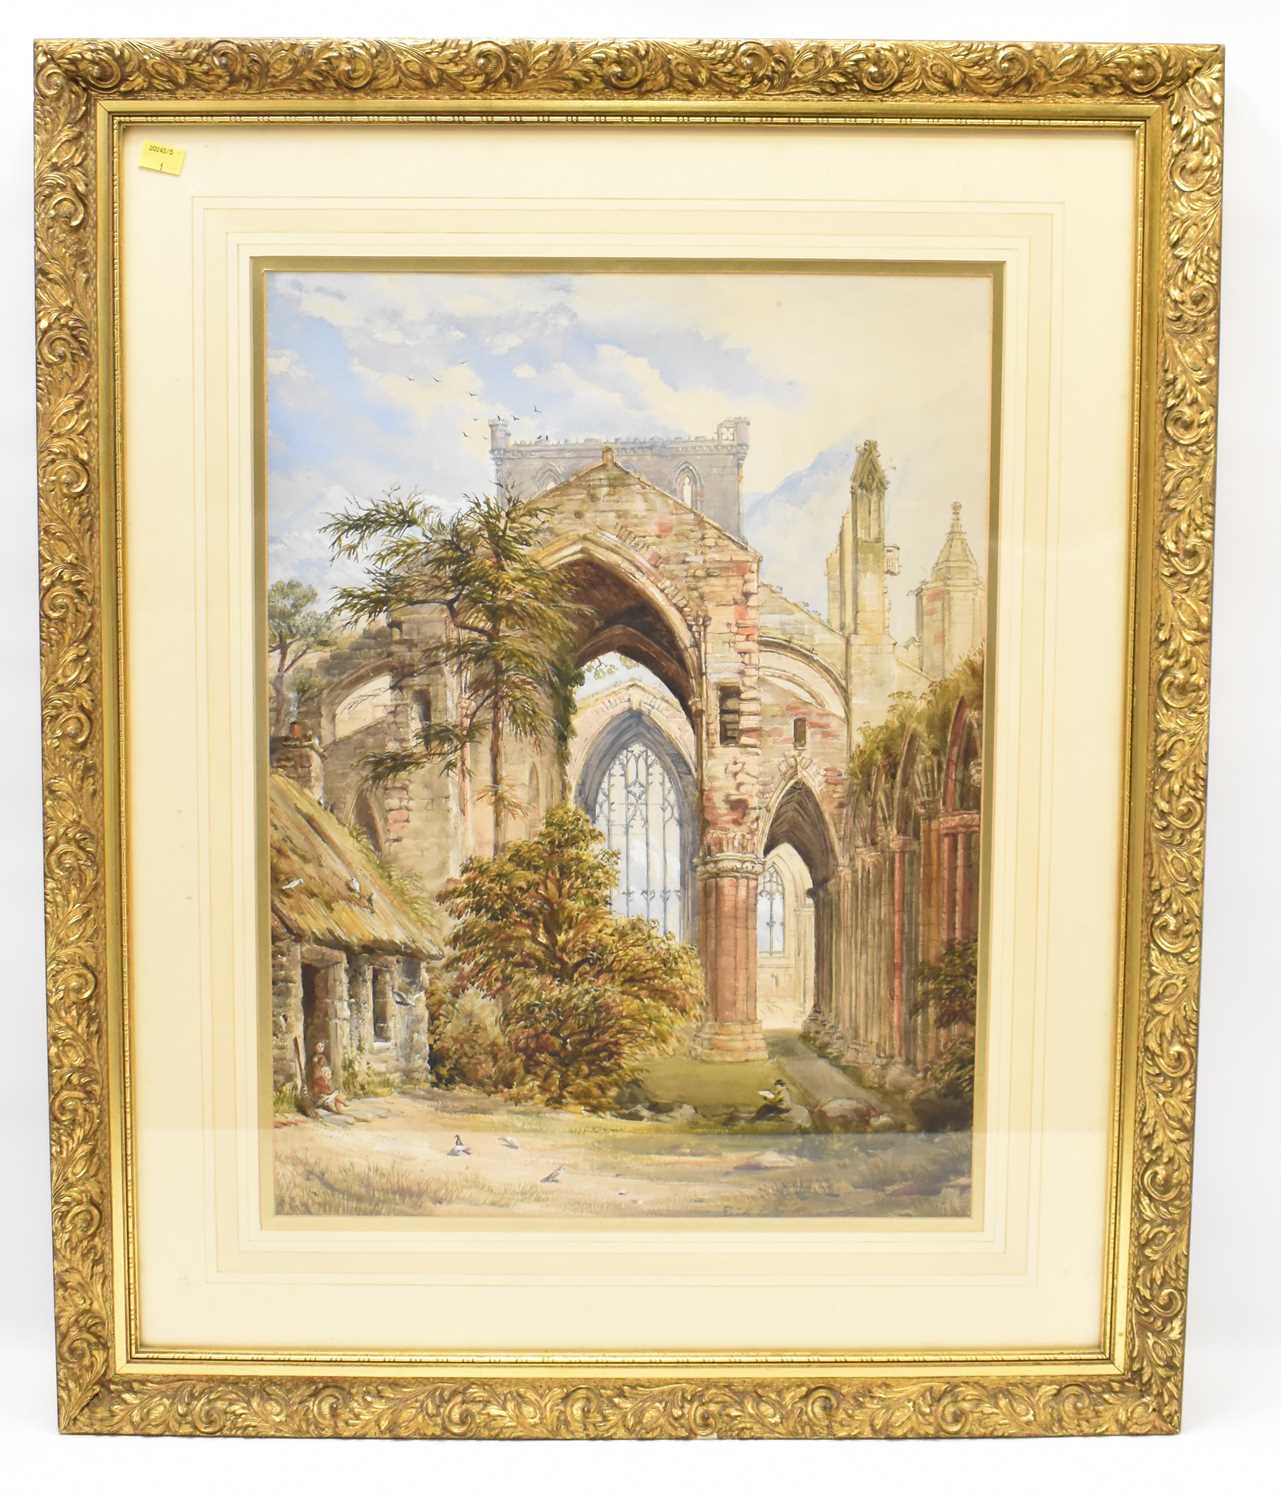 RICHARD MANSER RAYNER (1843-1908); watercolour, the internal and external frontage of a church-